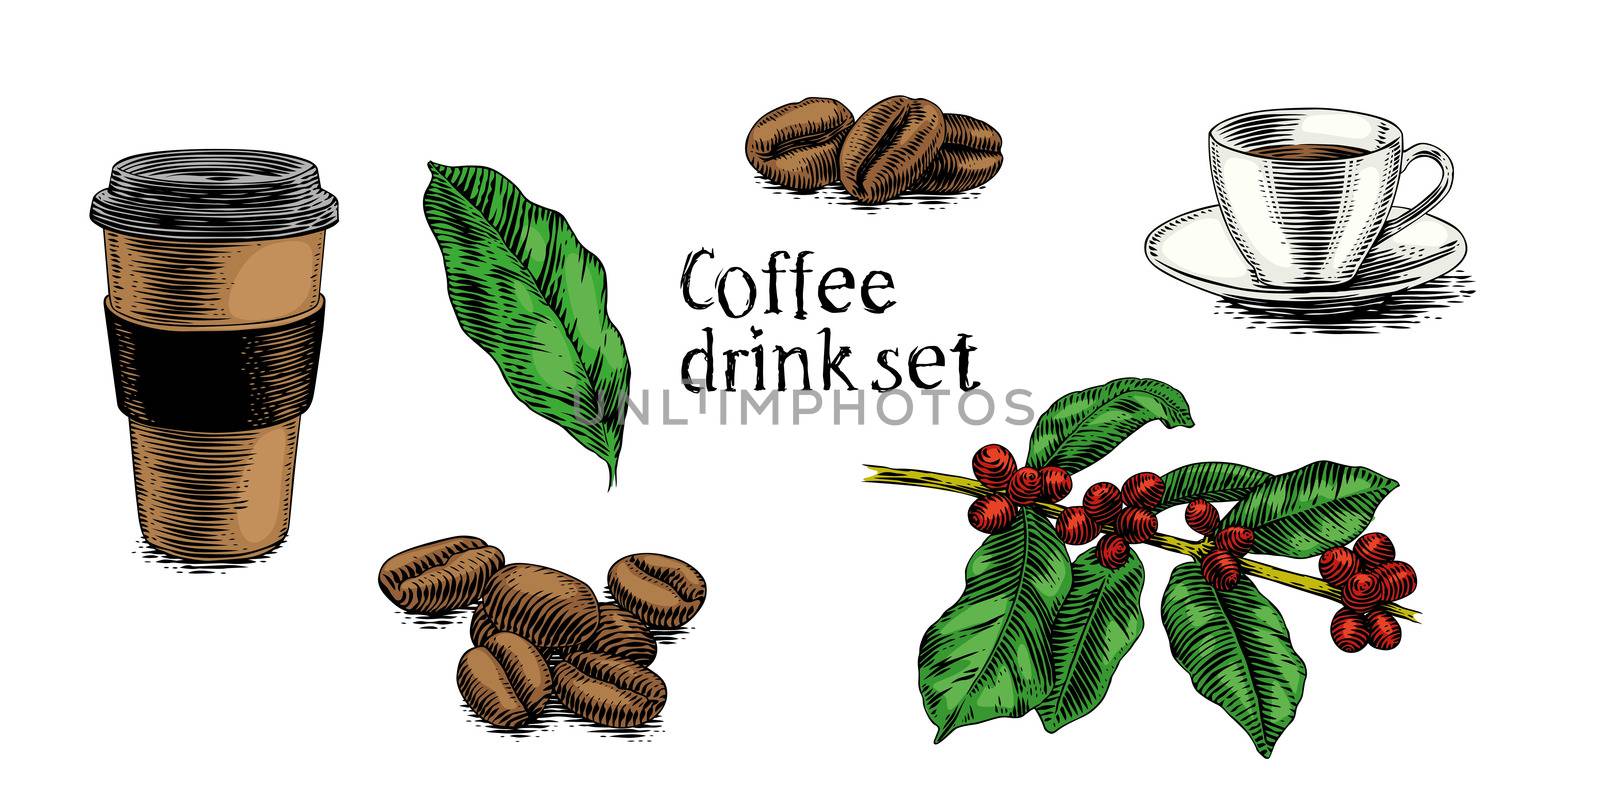 Set of pictures about coffee drink (cups, plant, coffee beans)